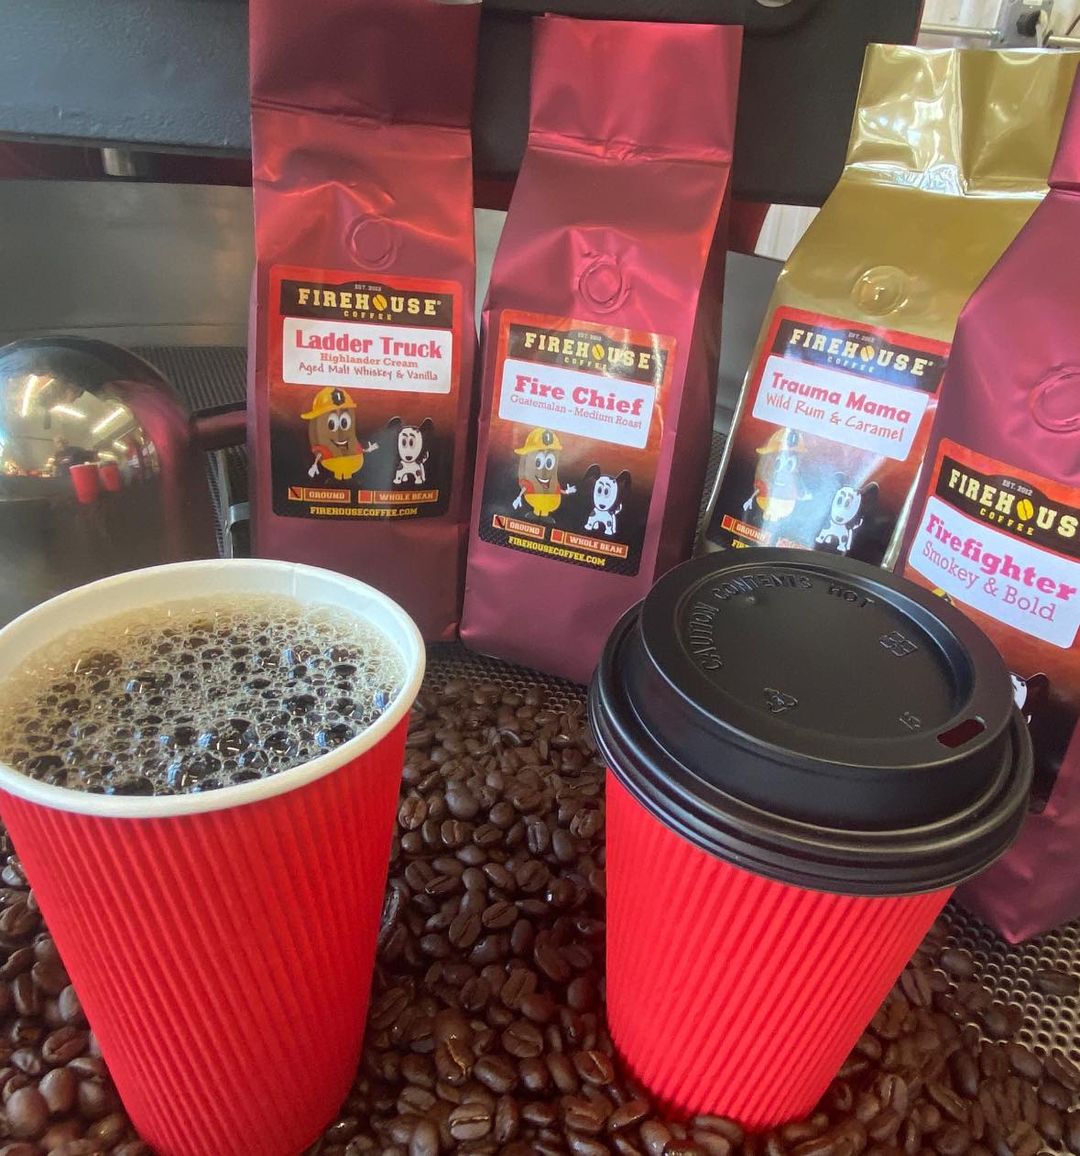 Some red coffee cups with bags of Firehouse Coffee beans in the background